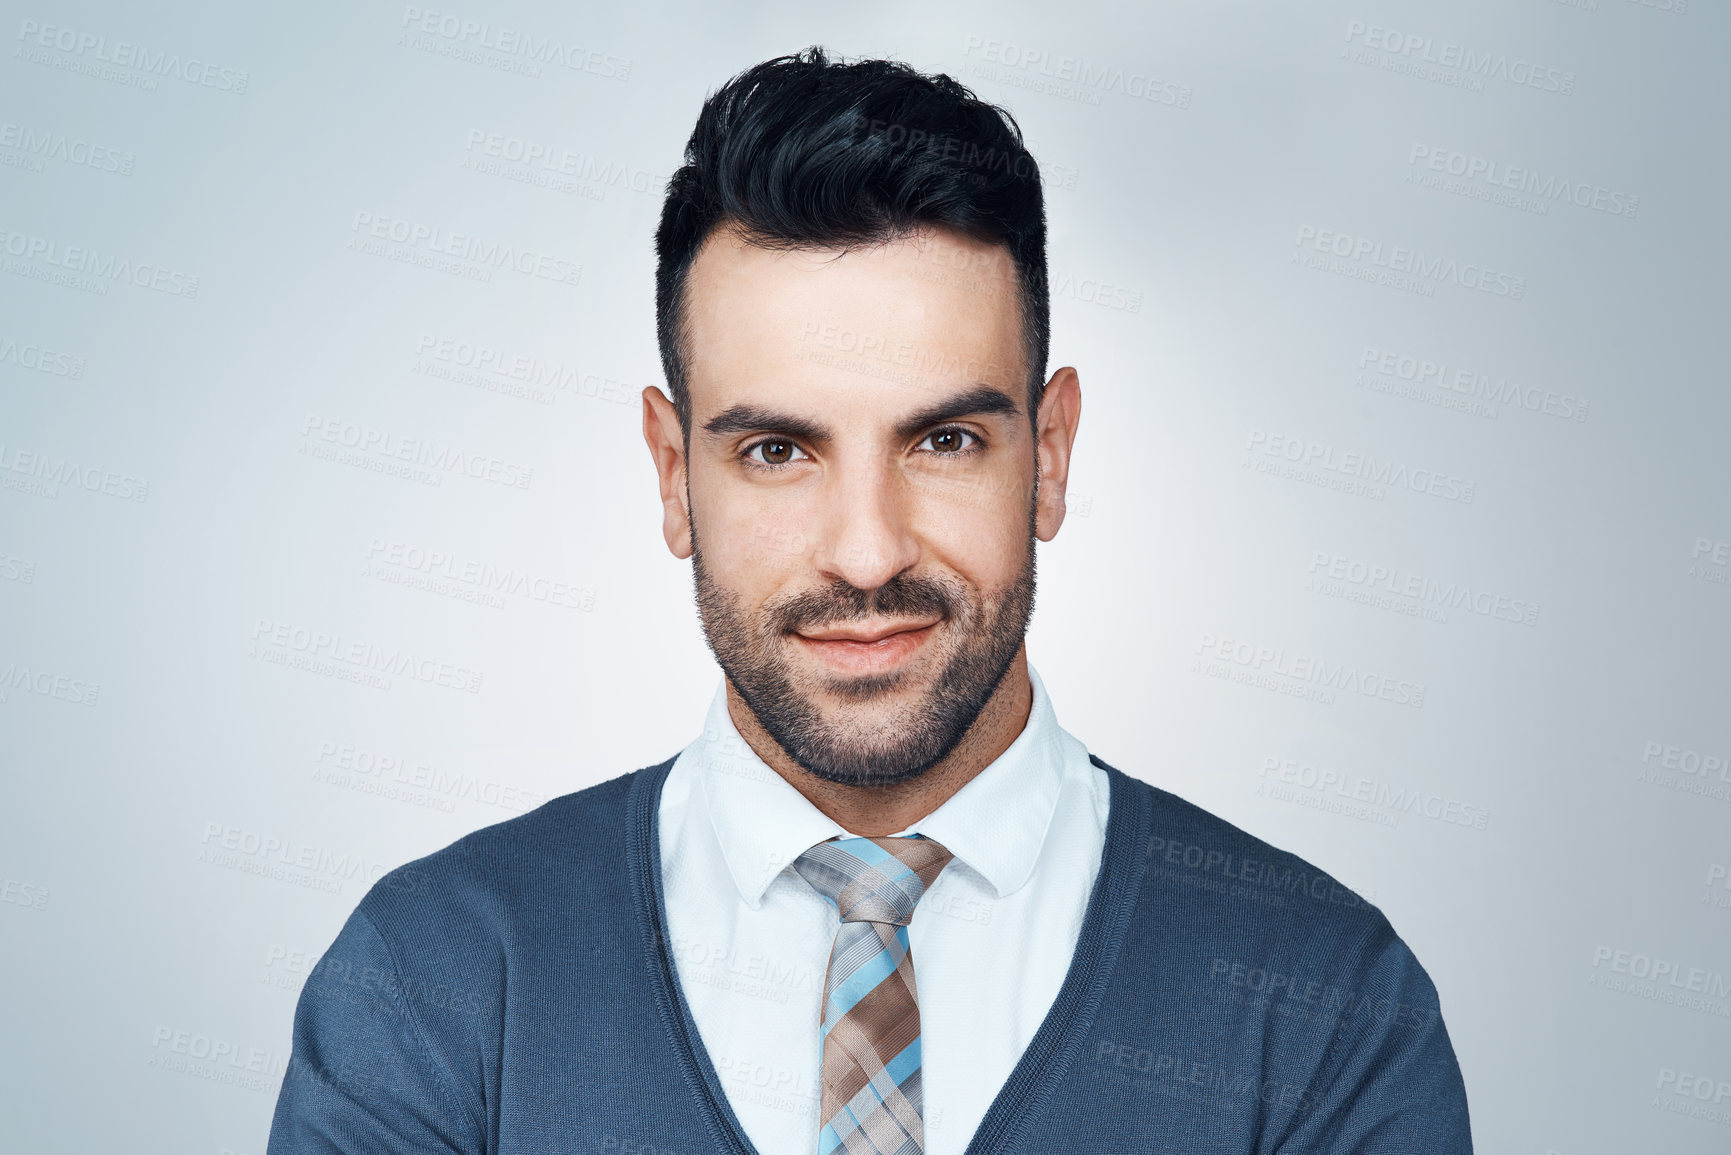 Buy stock photo Studio portrait of a handsome young businessman posing against a grey background